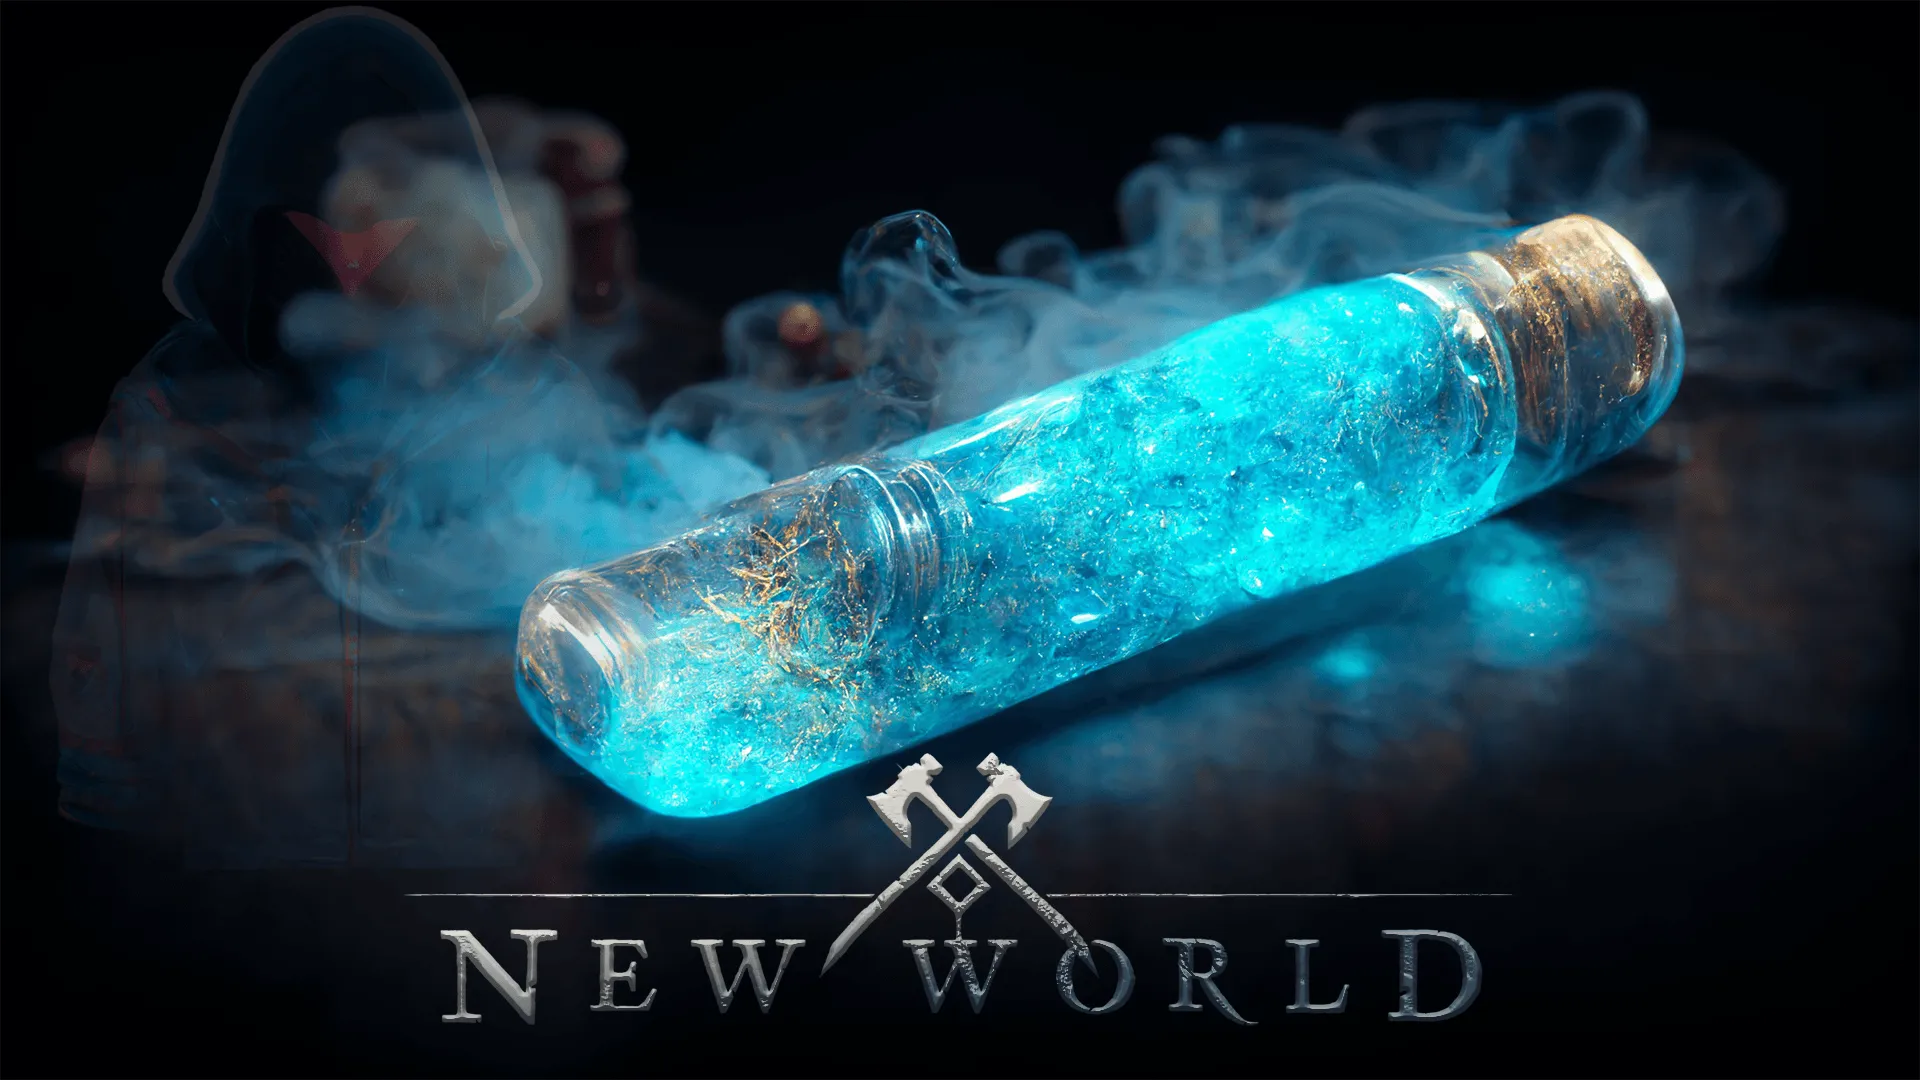 New World - Image of Condensed Azoth in vial - New World Guide